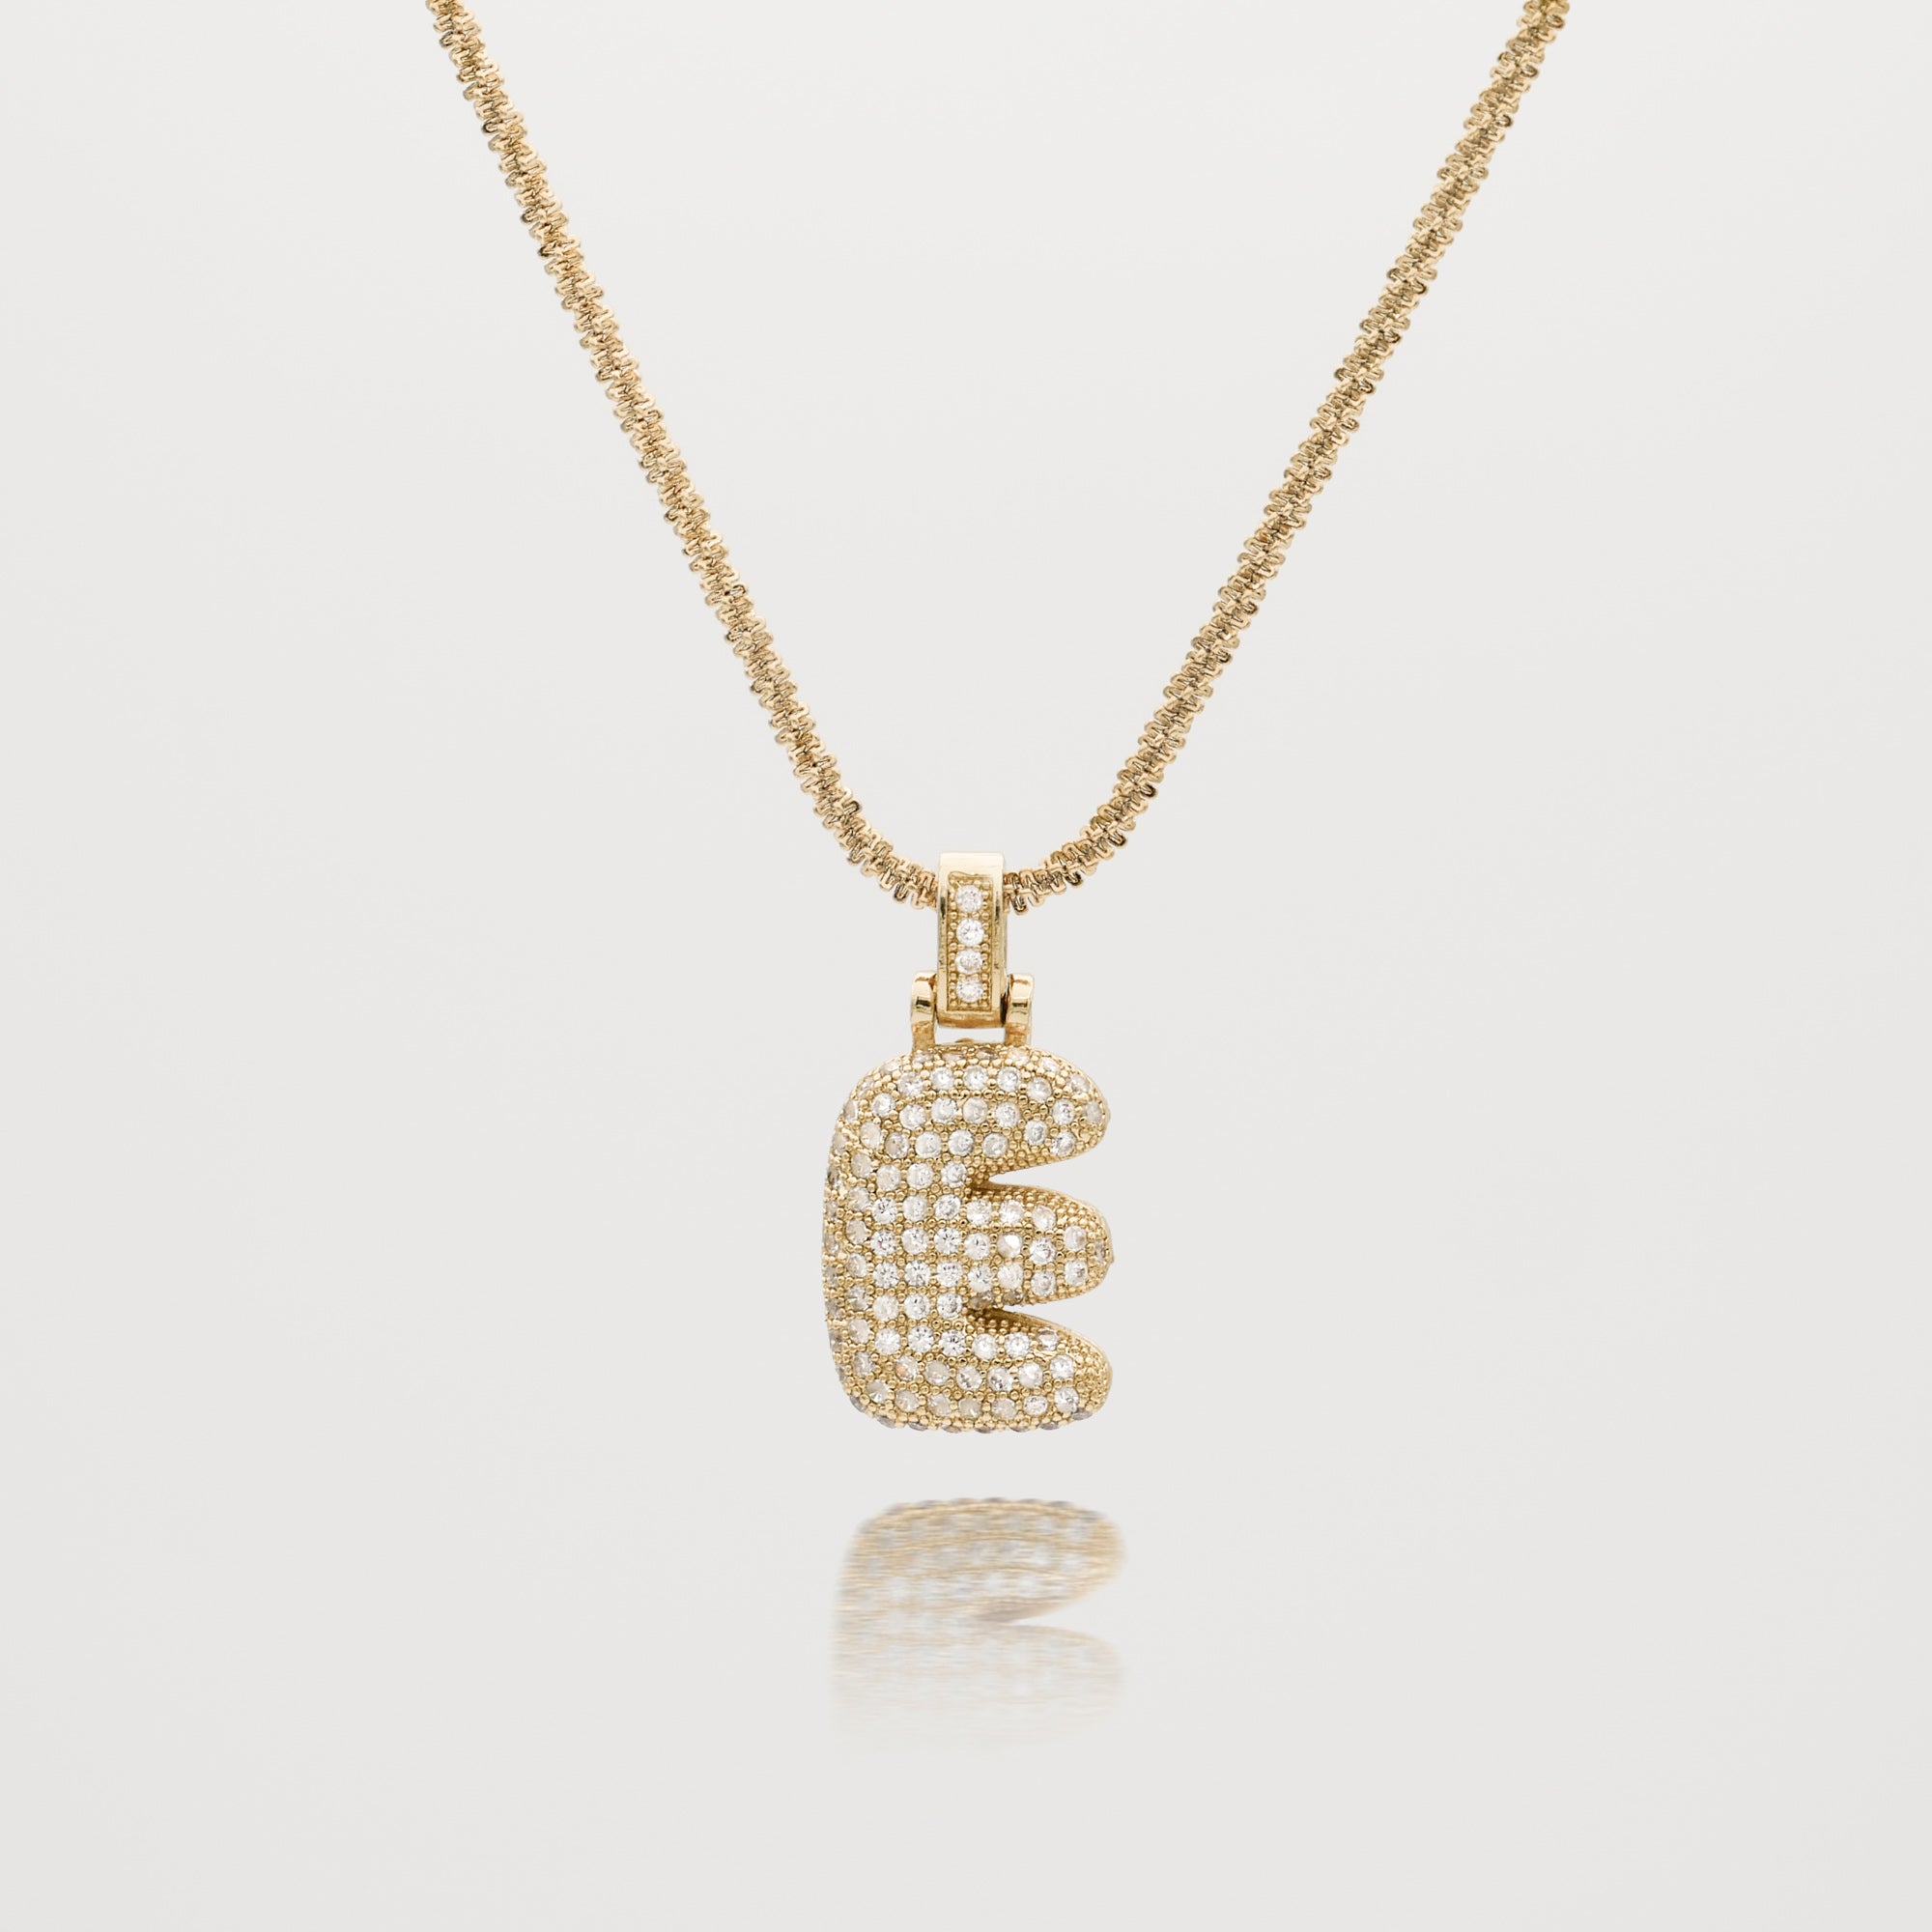 Pave Bubble Letter Initial Necklace encrusted with radiant CZ stones in gold tennis chain